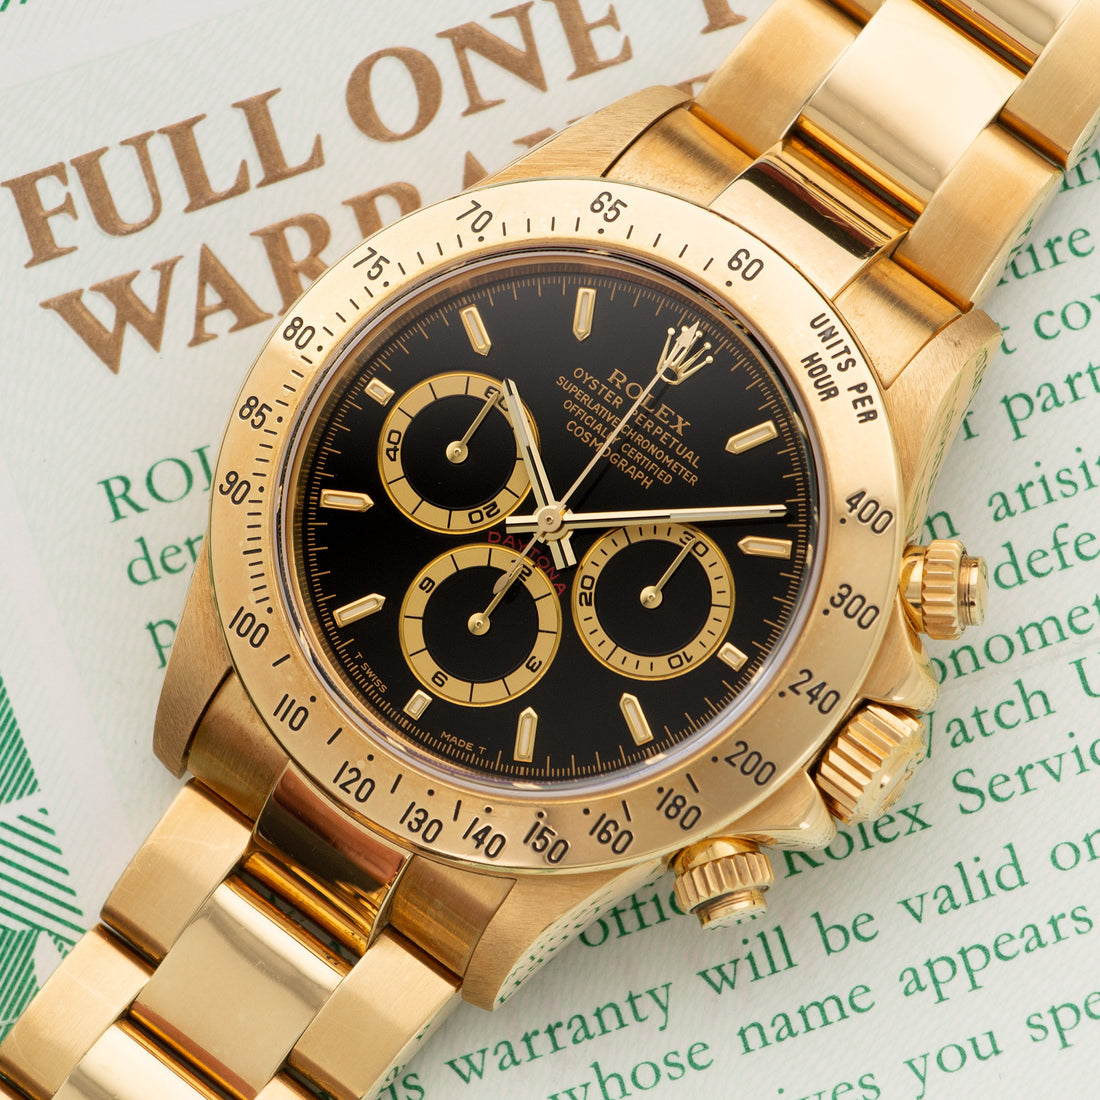 Rolex Yellow Gold Cosmograph Daytona Watch Ref. 16528 with Original Box and Papers